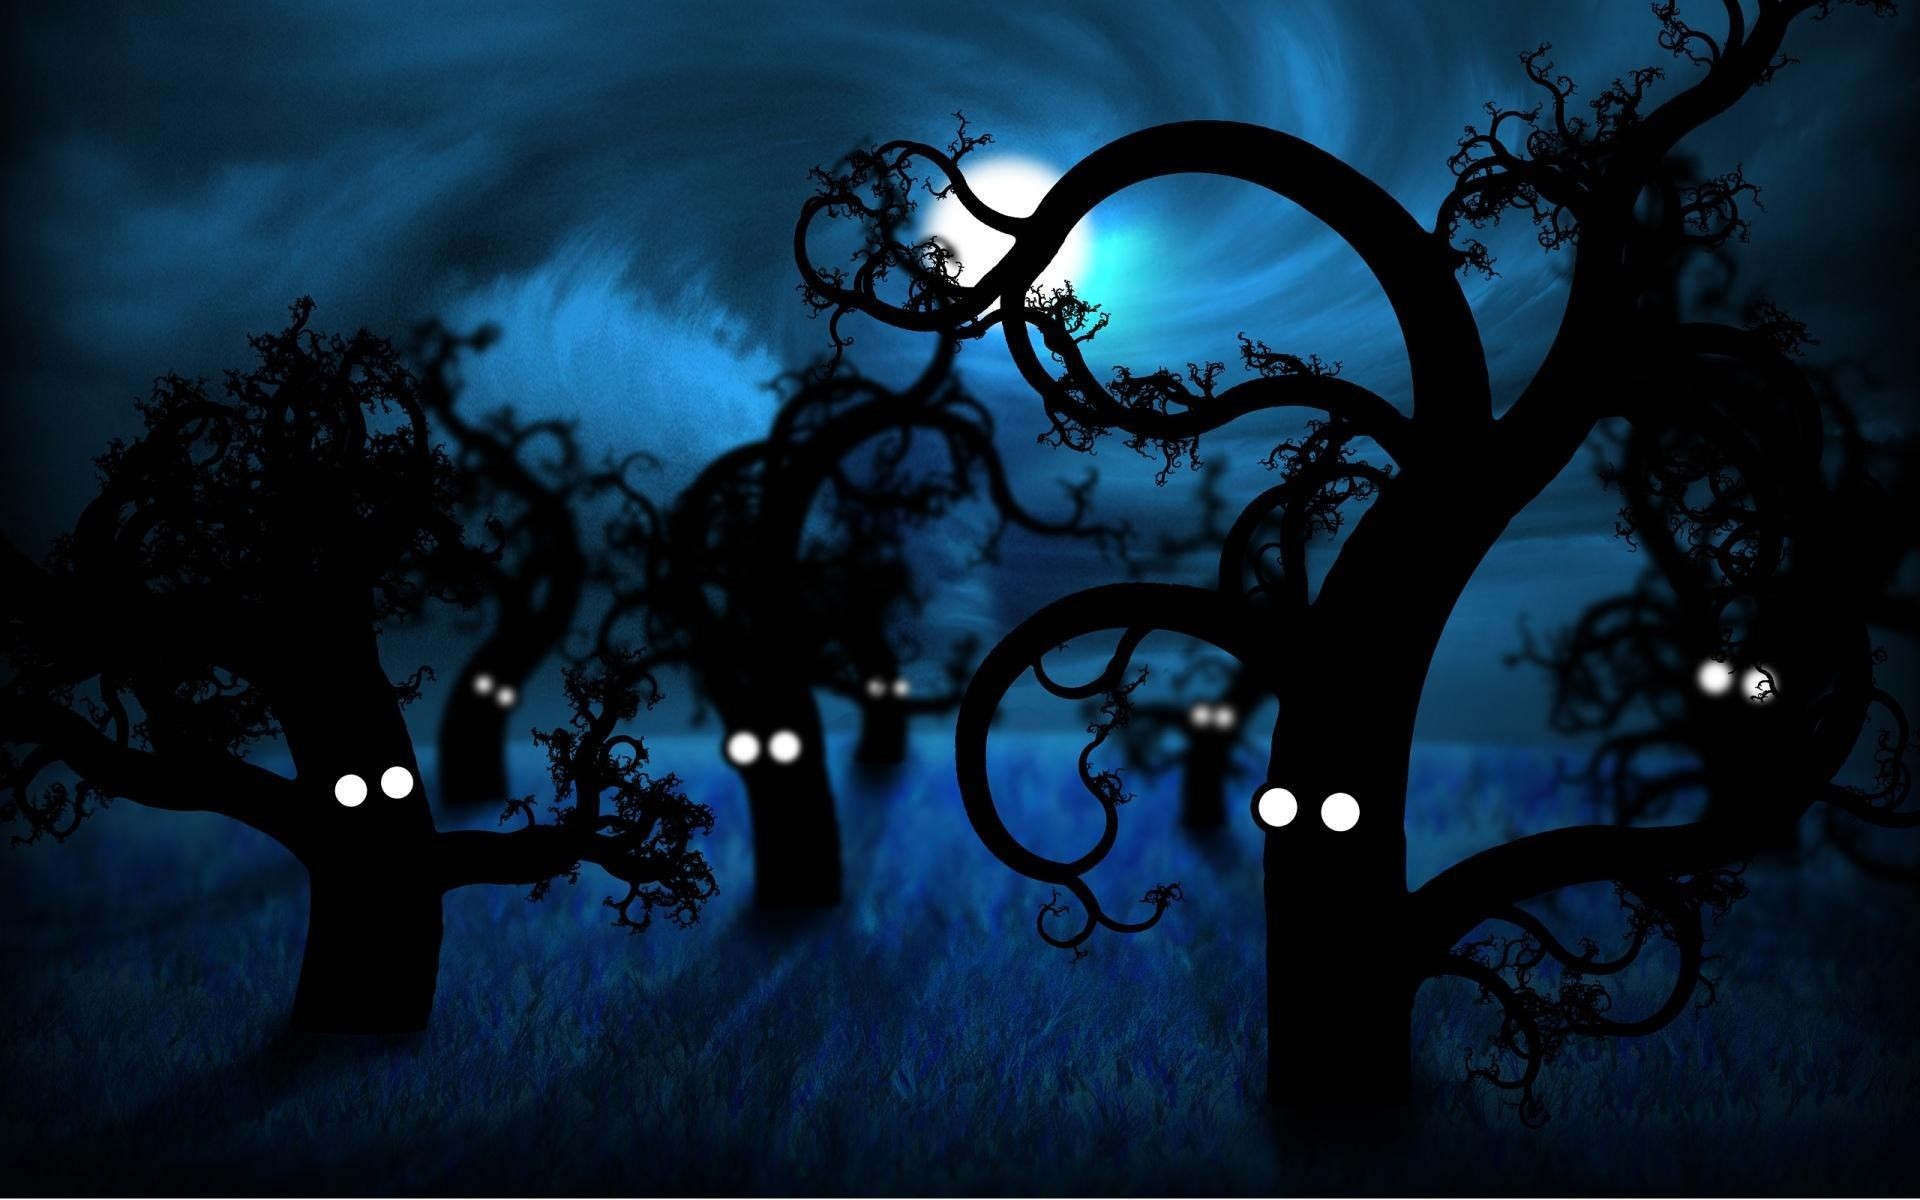 1920x1200 Wallpapers Backgrounds - desktop abstract backgrounds midnight forest graphic  Wallpapers